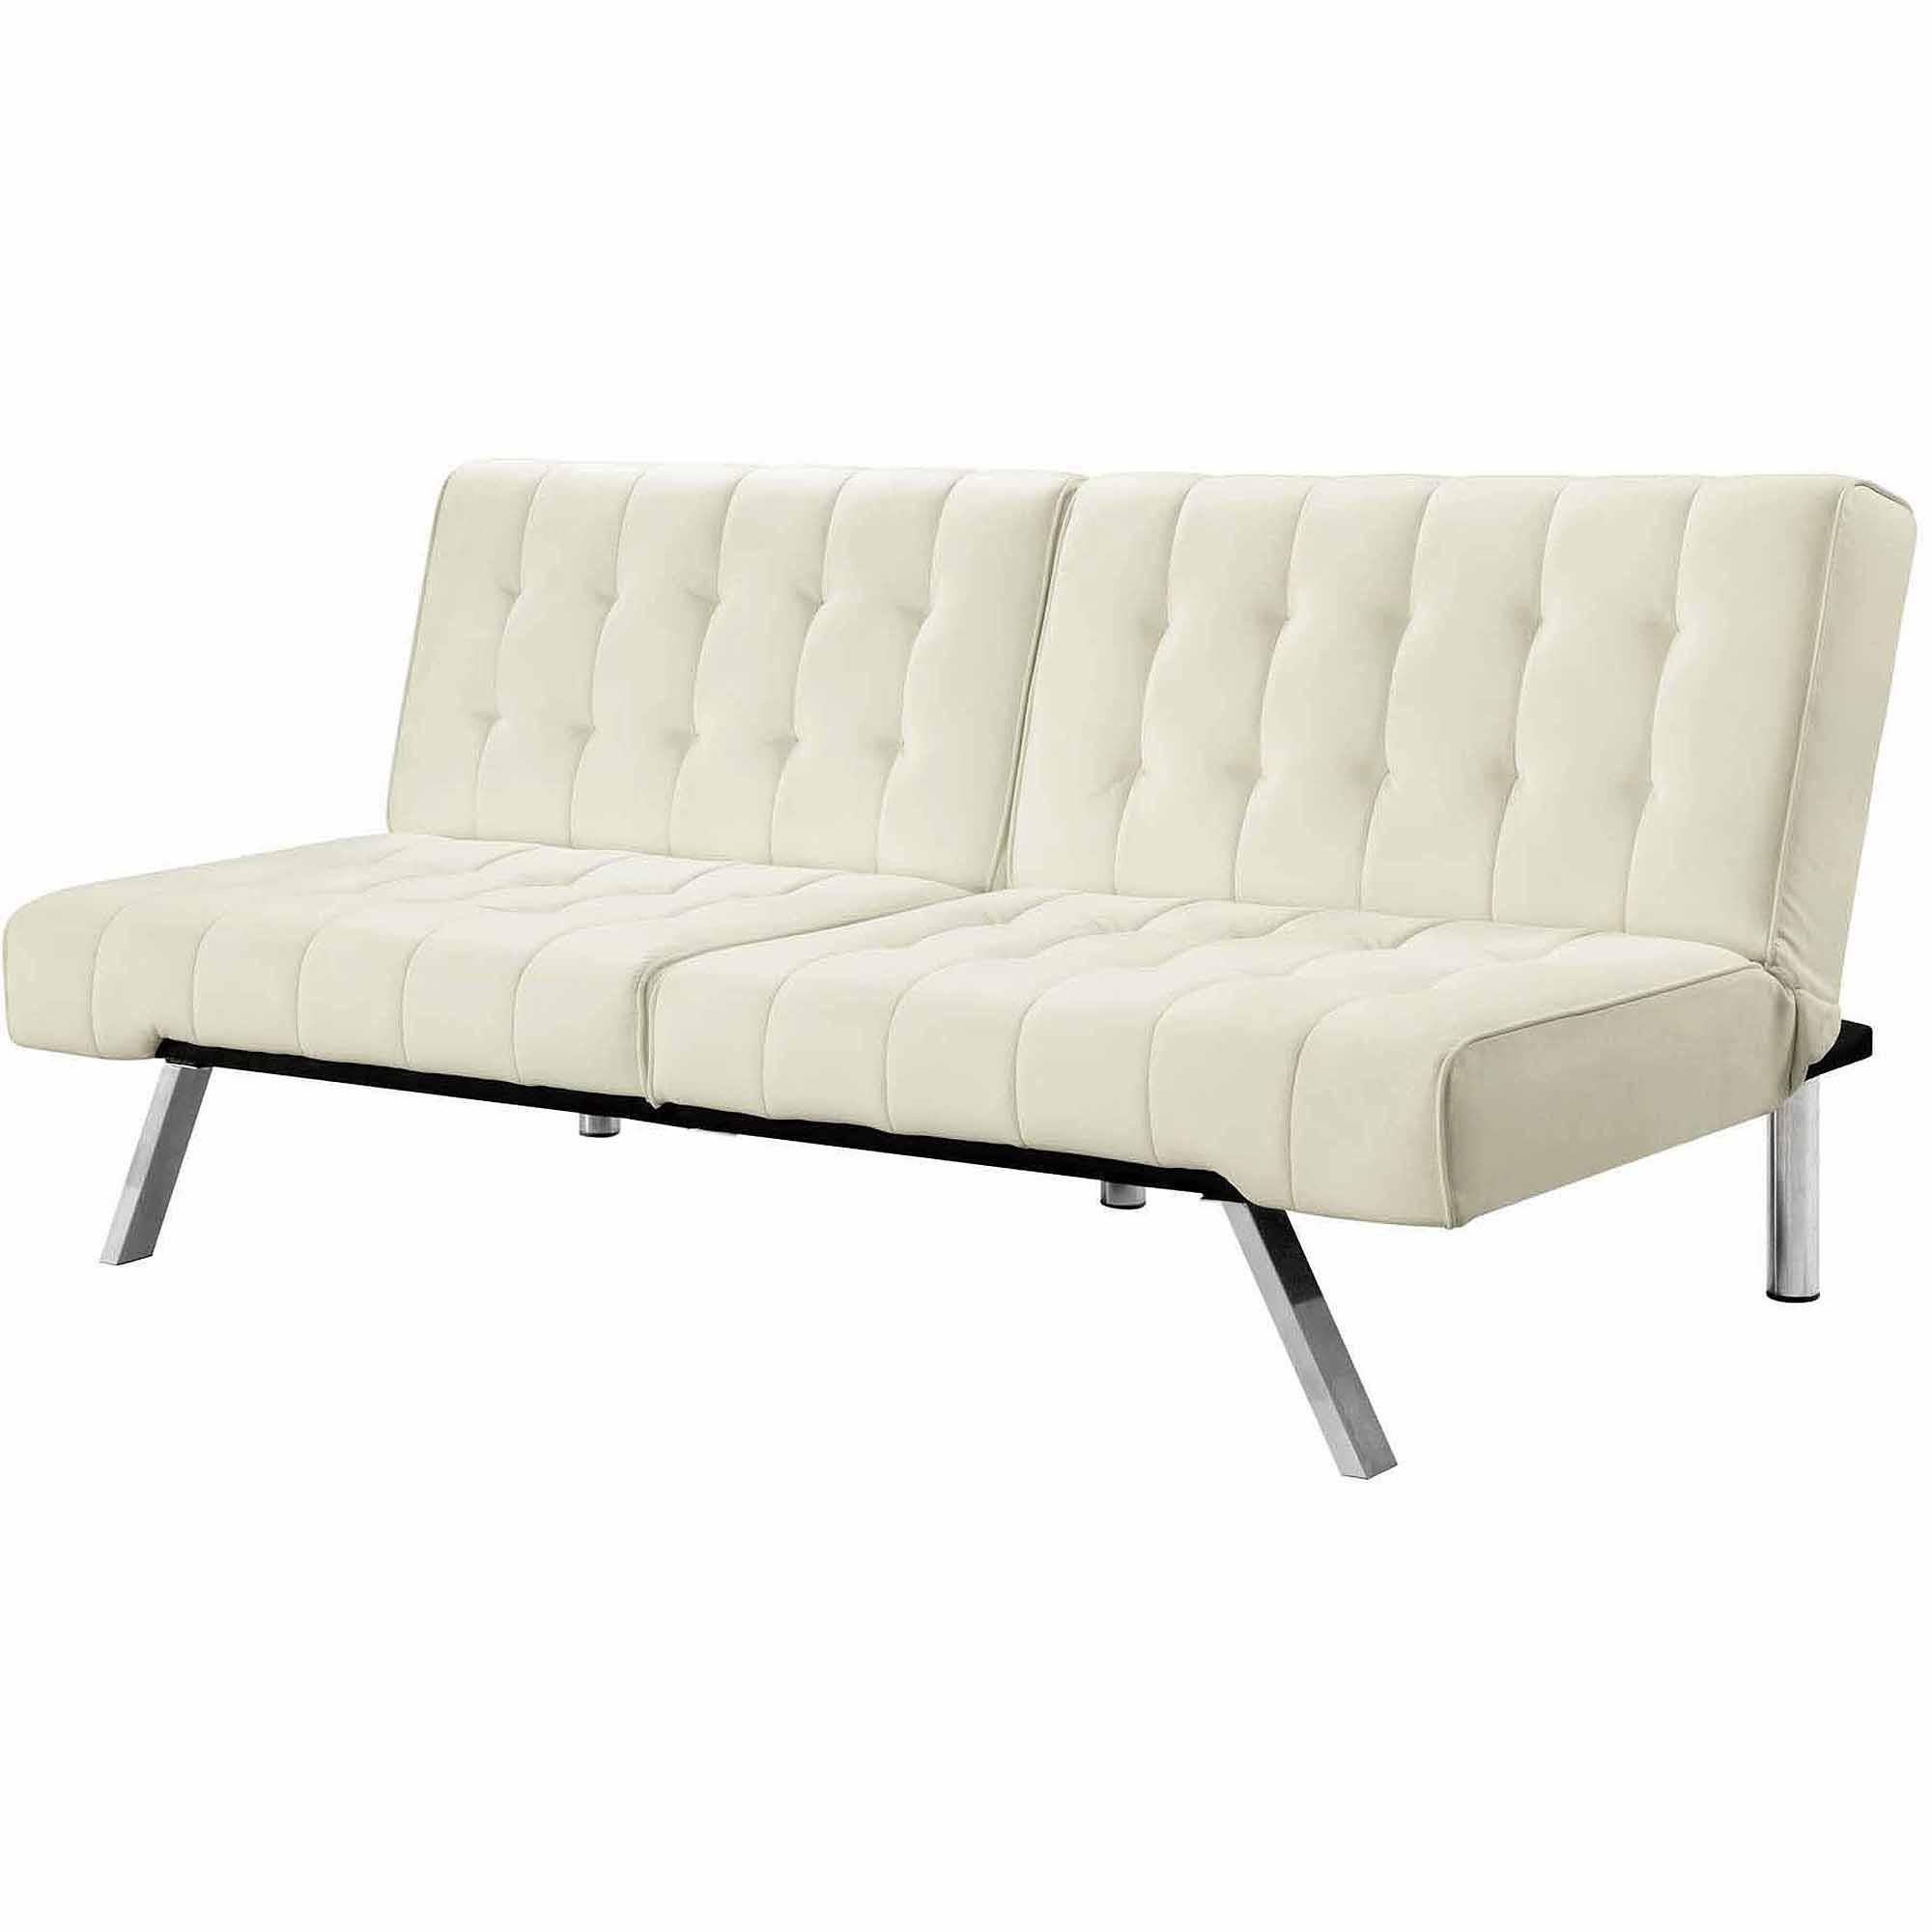 Emily Convertible Faux Leather Futon, Multiple Colors – Walmart Intended For Convertible Sofa Chair Bed (View 18 of 20)